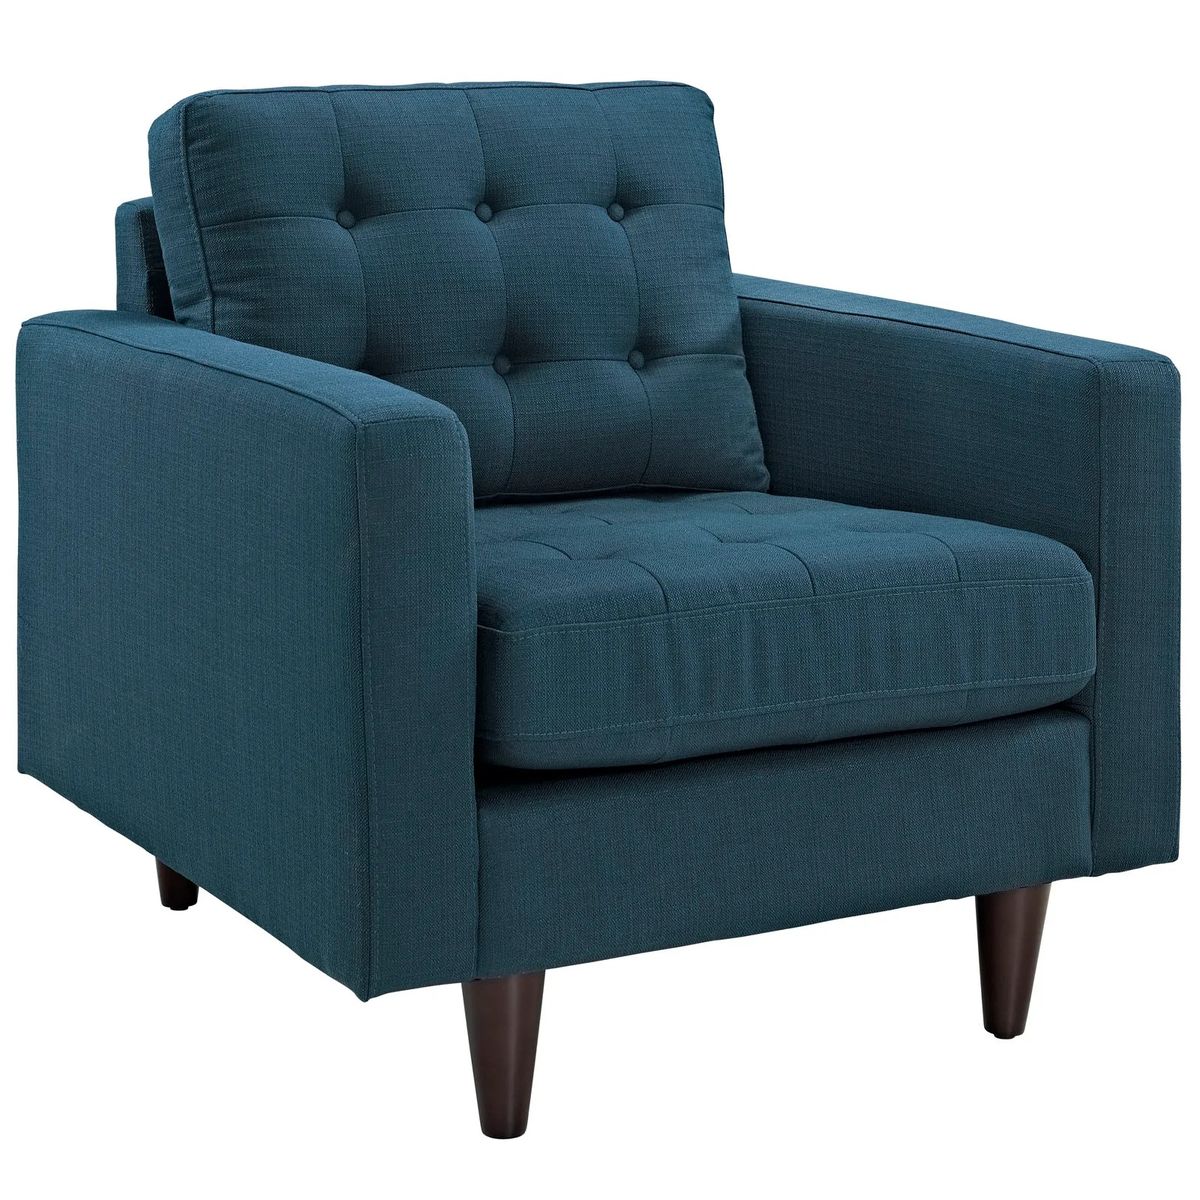 Azure Empress Single Seater Couch in Blue/Beige | Shop Today. Get it ...